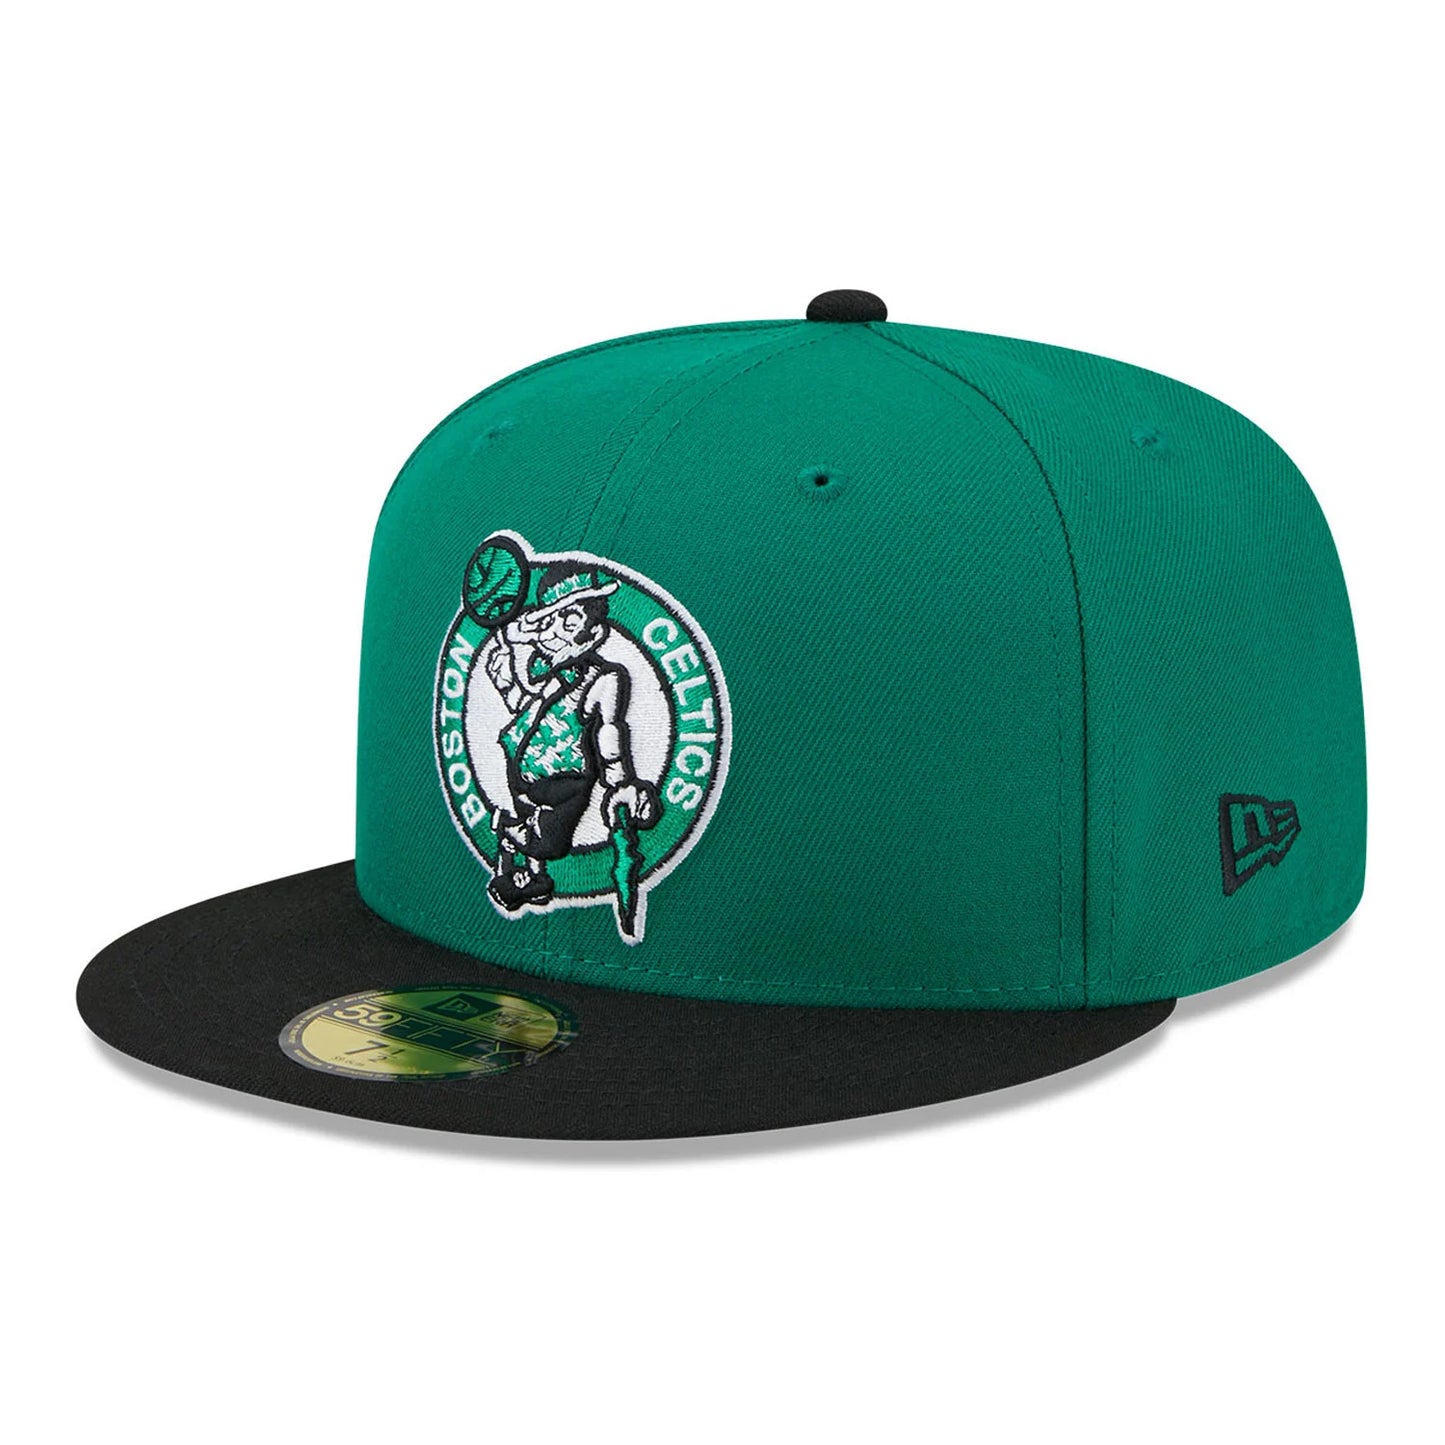 NEW ERA Boston Celtics NBA All Star Game Green 59FIFTY Fitted Cap